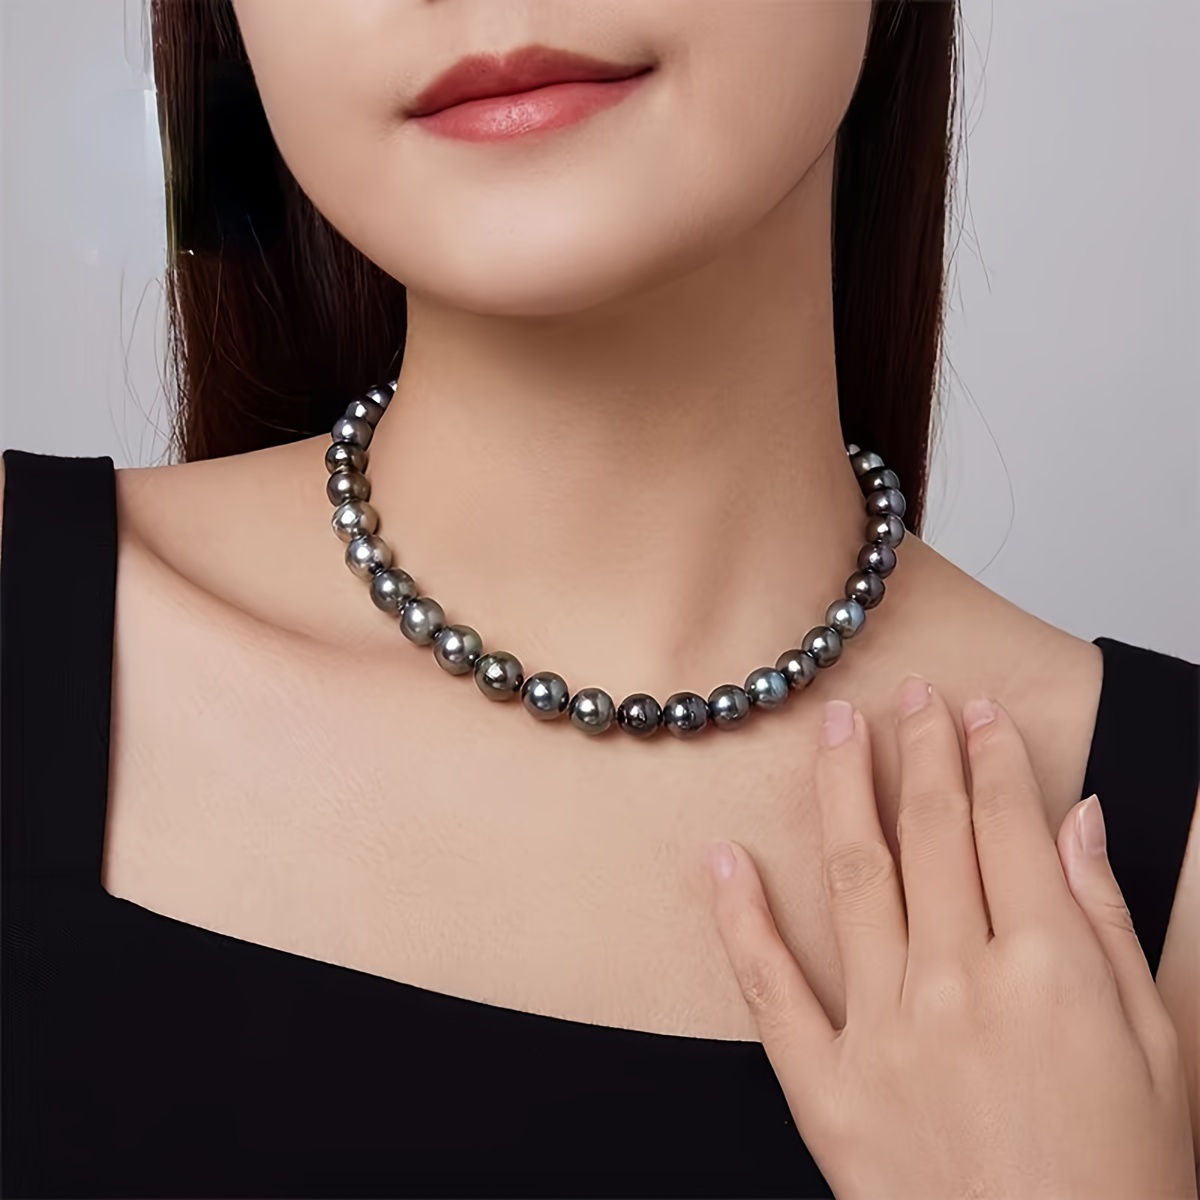 

1pc Elegant Natural Freshwater Pearl Necklace, Semi-round Pearls, Peacock Blue-black Color, Simple Yet Luxurious For Daily Wear, Parties, Vacations, Weddings, Gifts For Women, Unisex High-end Jewelry